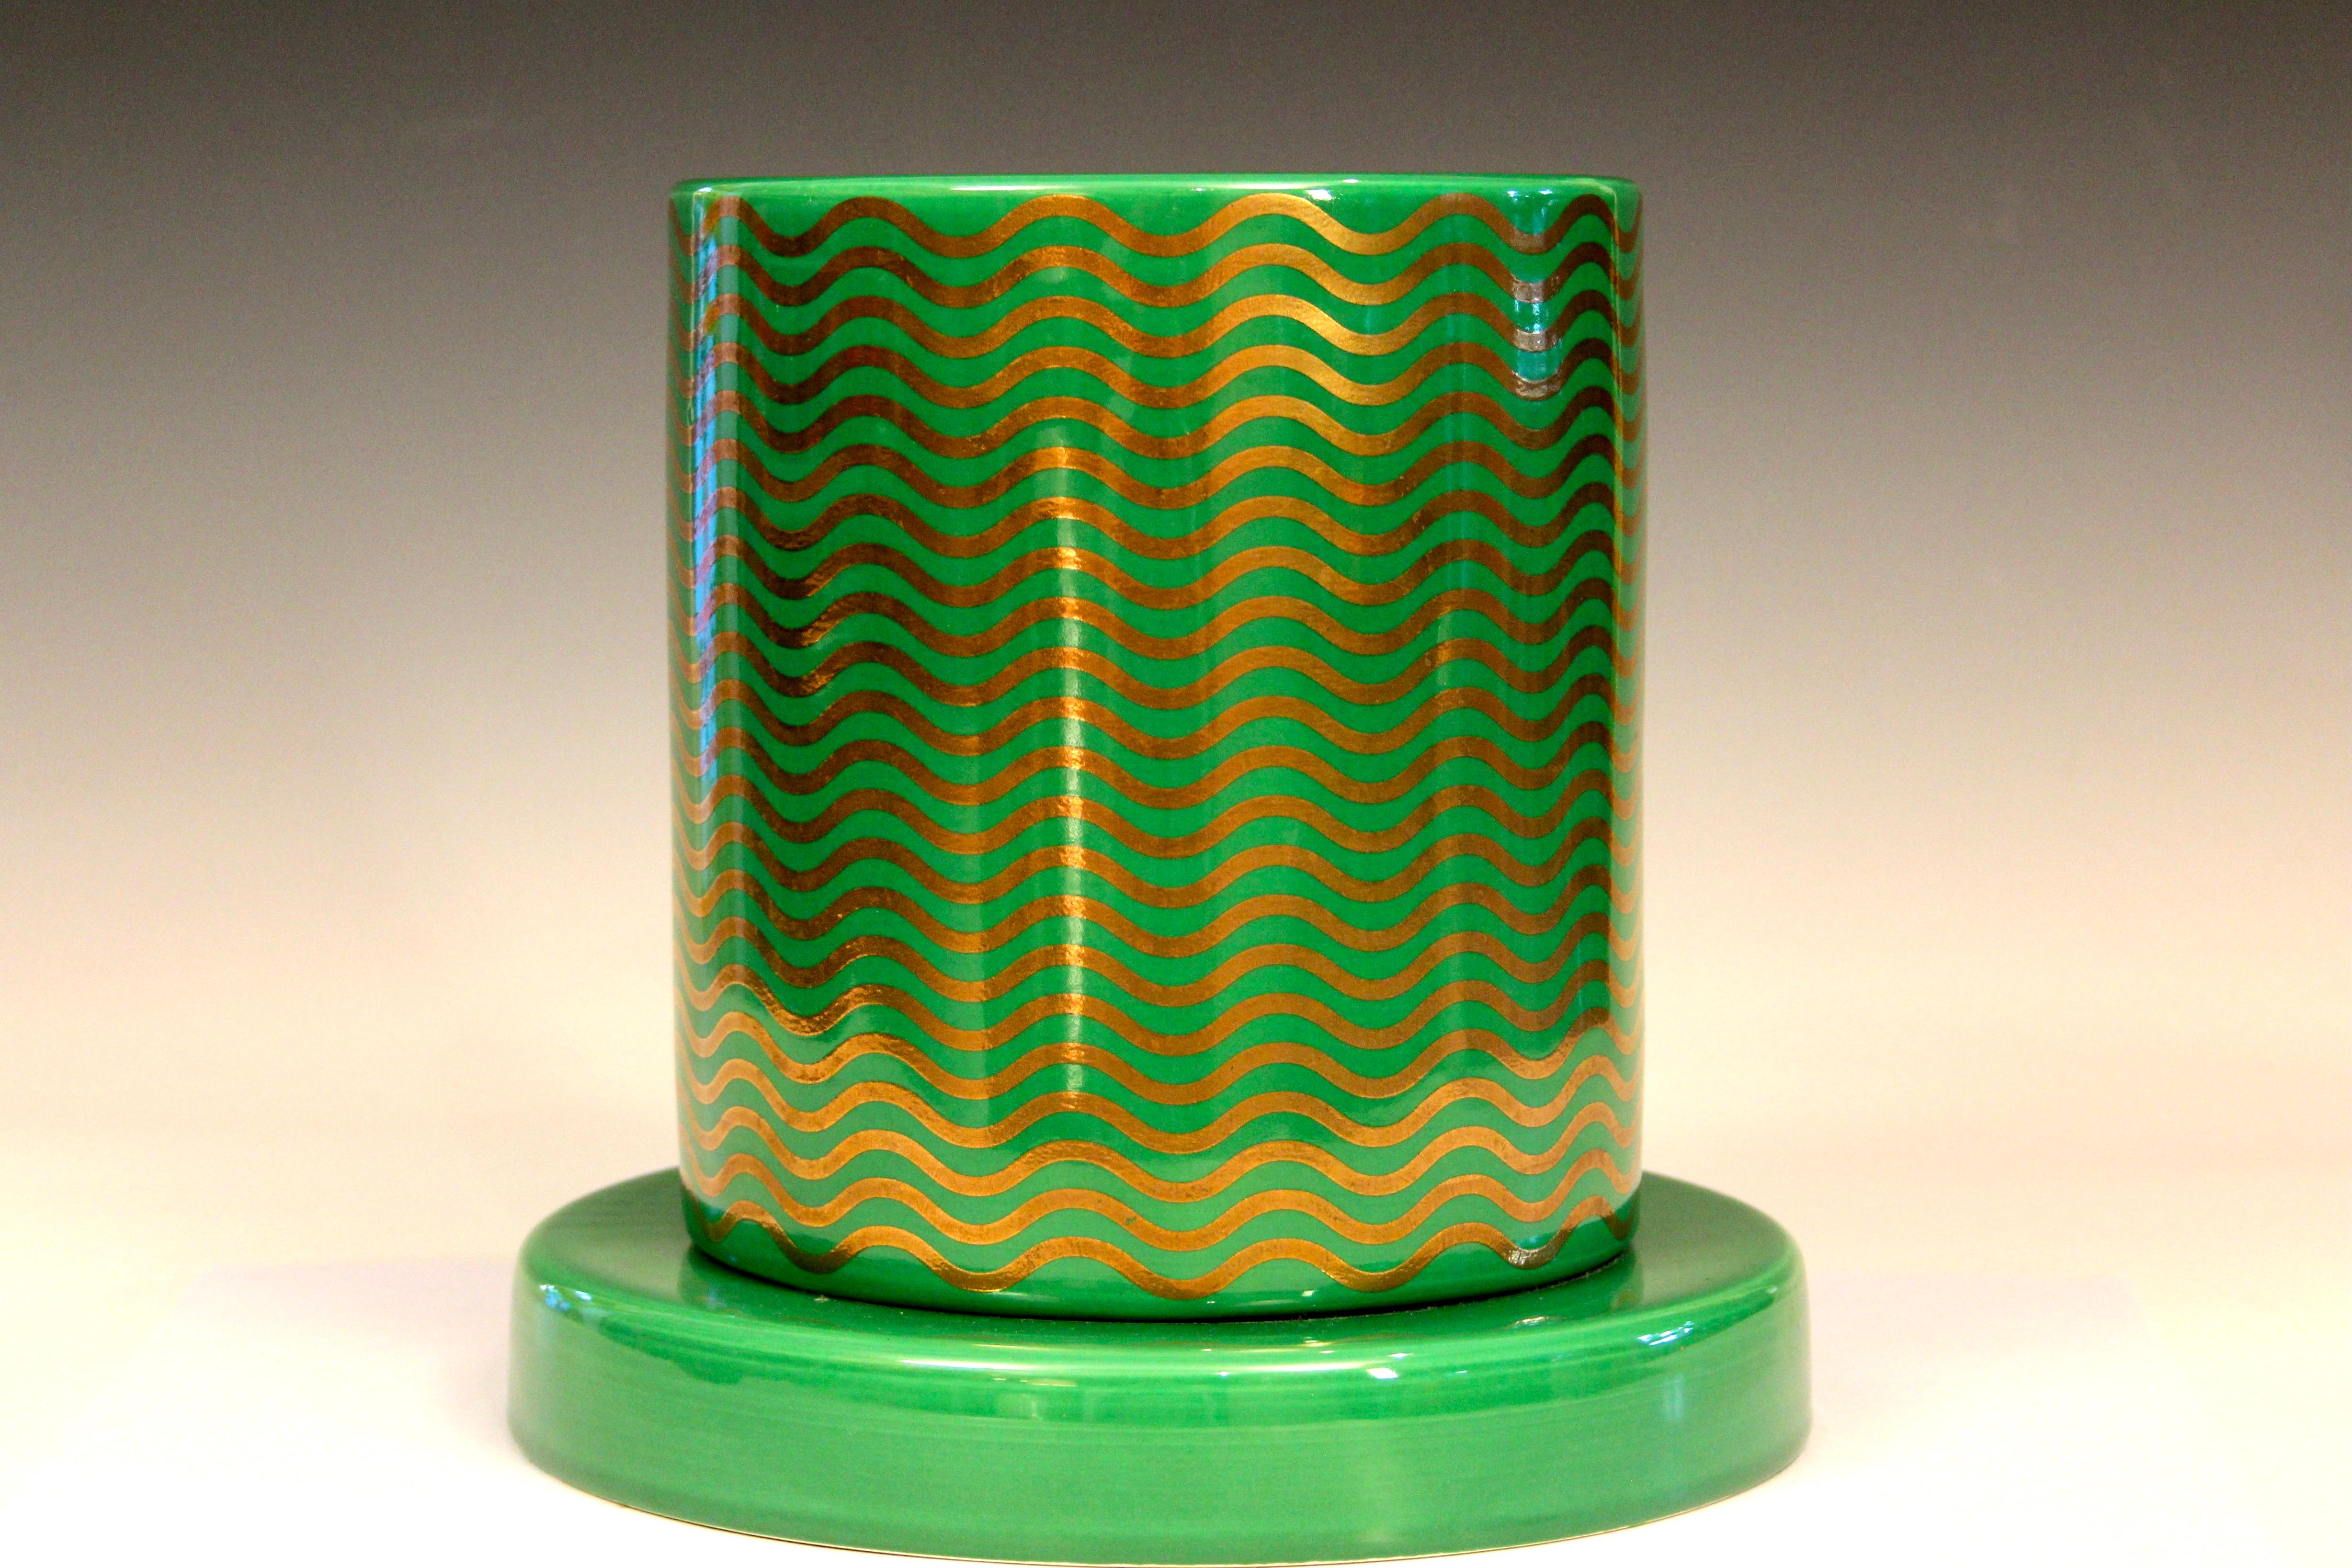 Italian Ettore Sottsass Vase Mediterraneo Green Gilt Waves Lavori in Corso Signed Dated For Sale